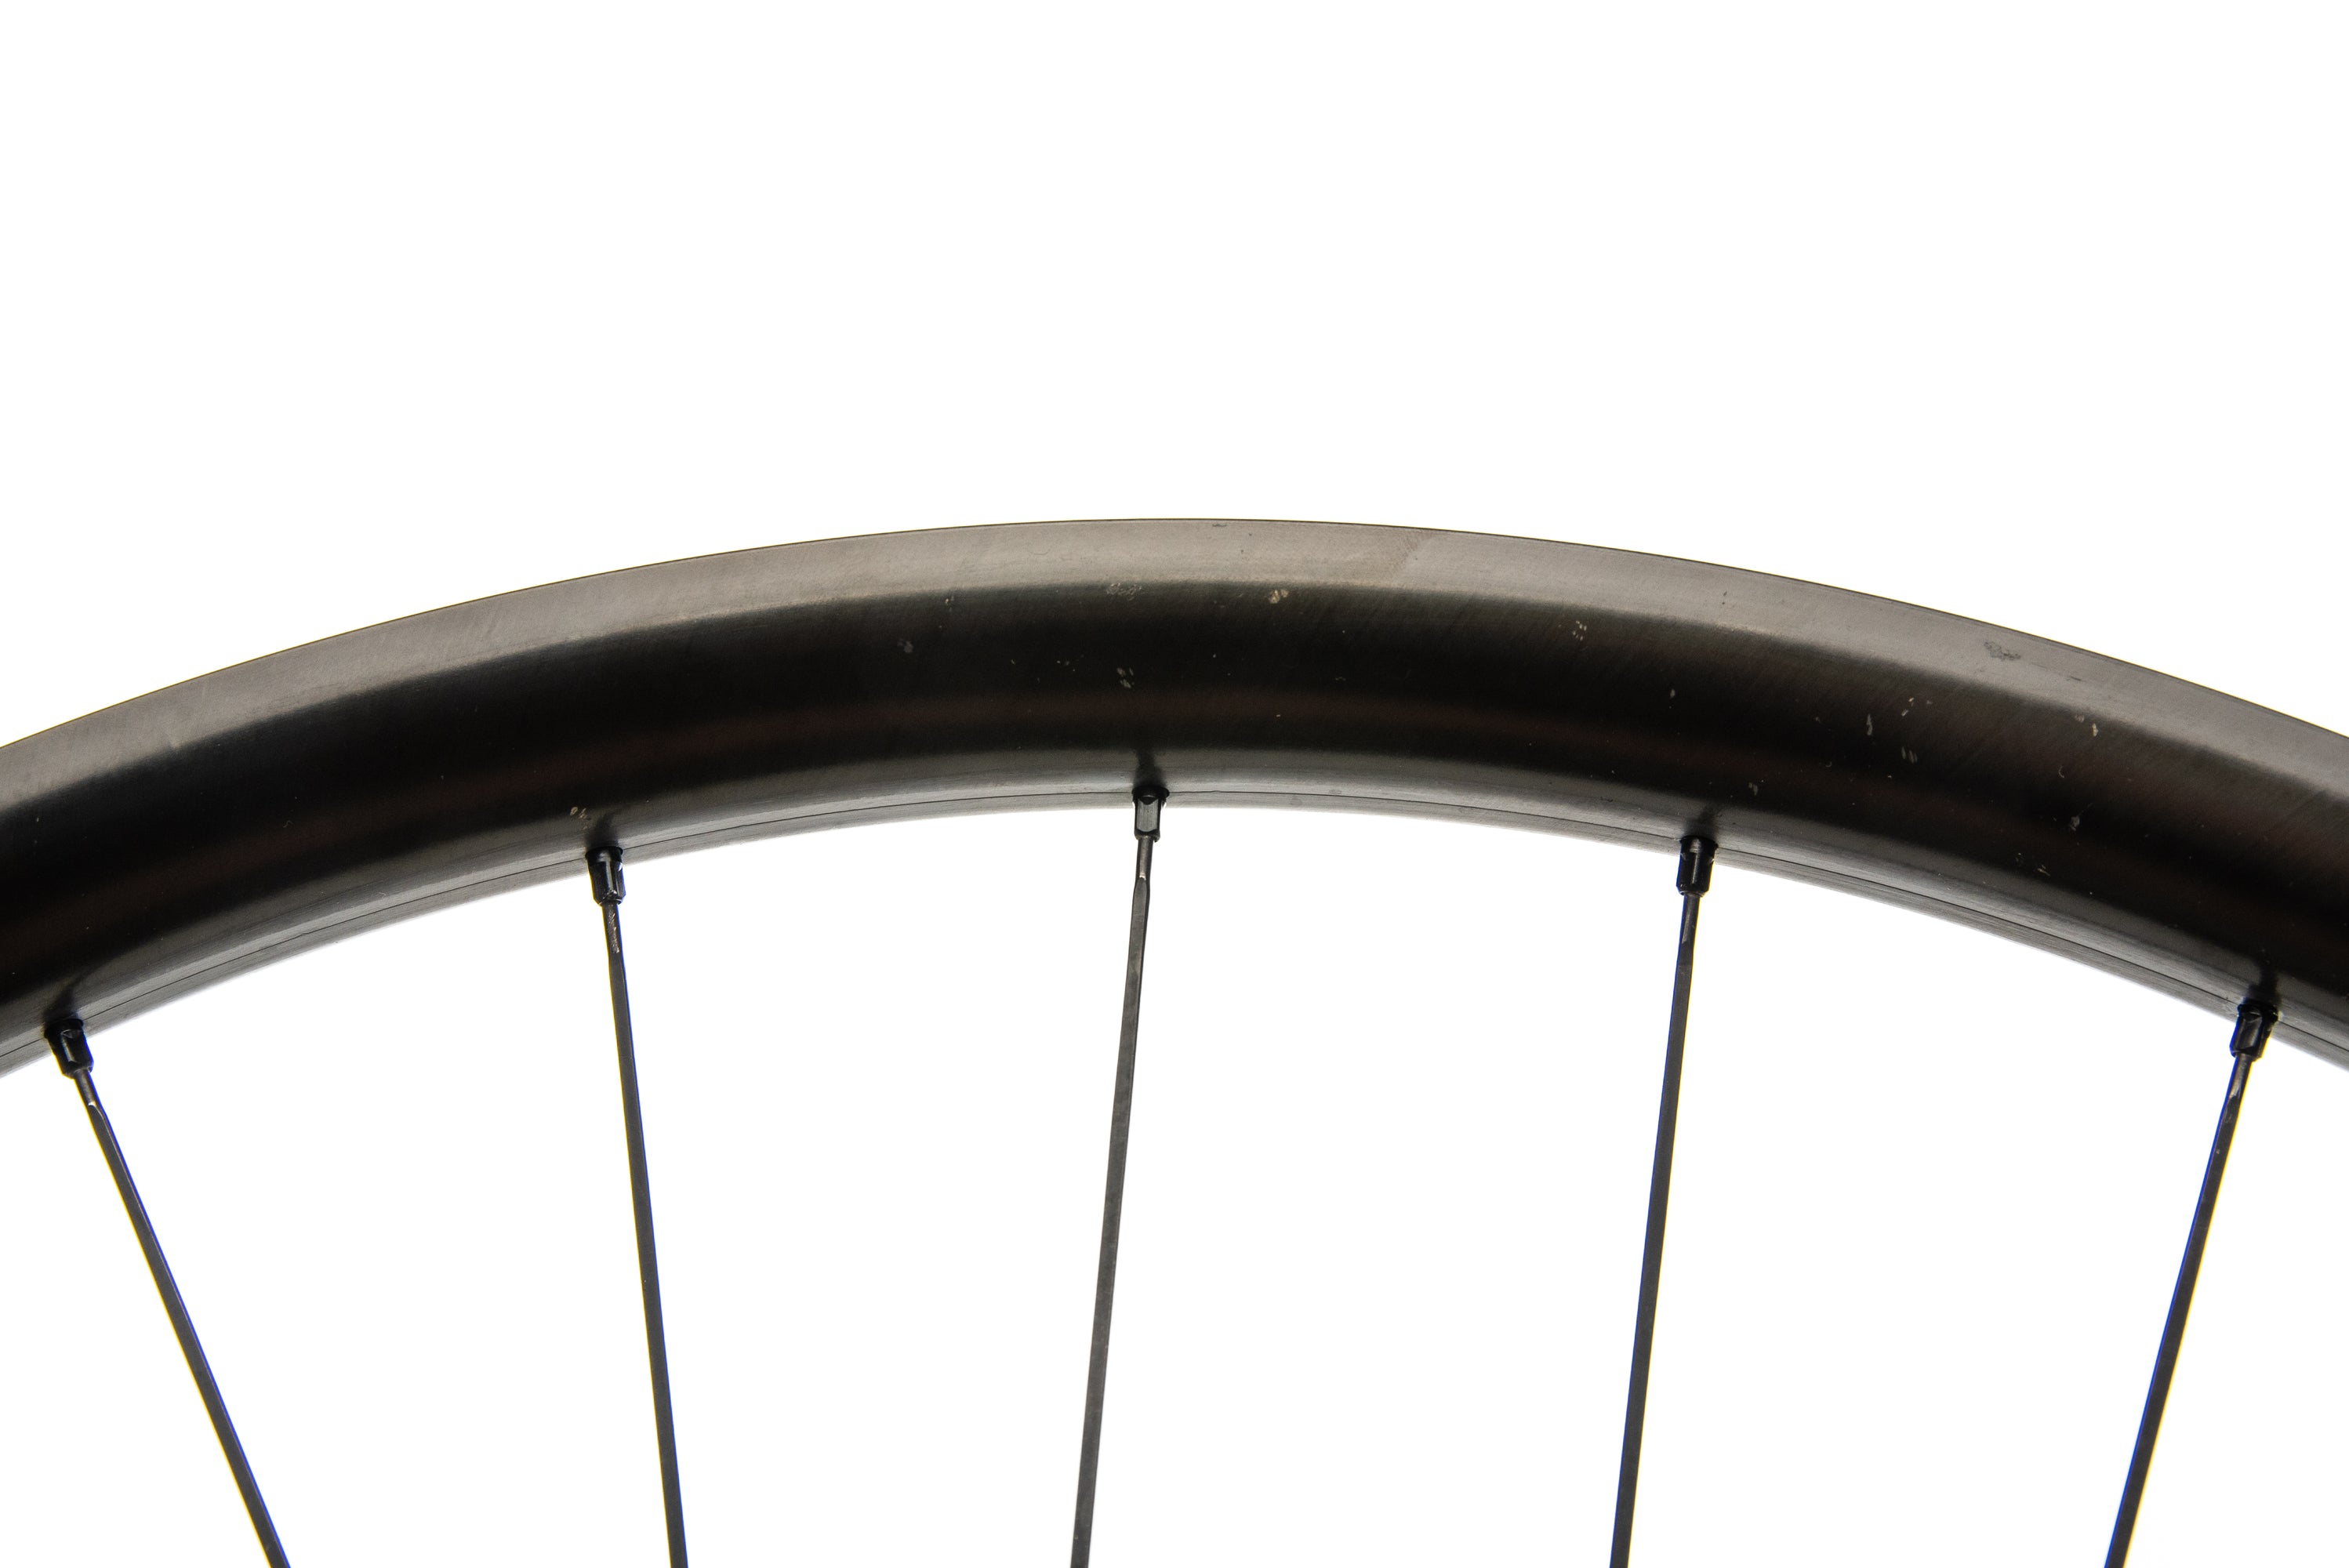 Reynolds TR 309 S Carbon Tubeless 29" Front Wheel detail 3